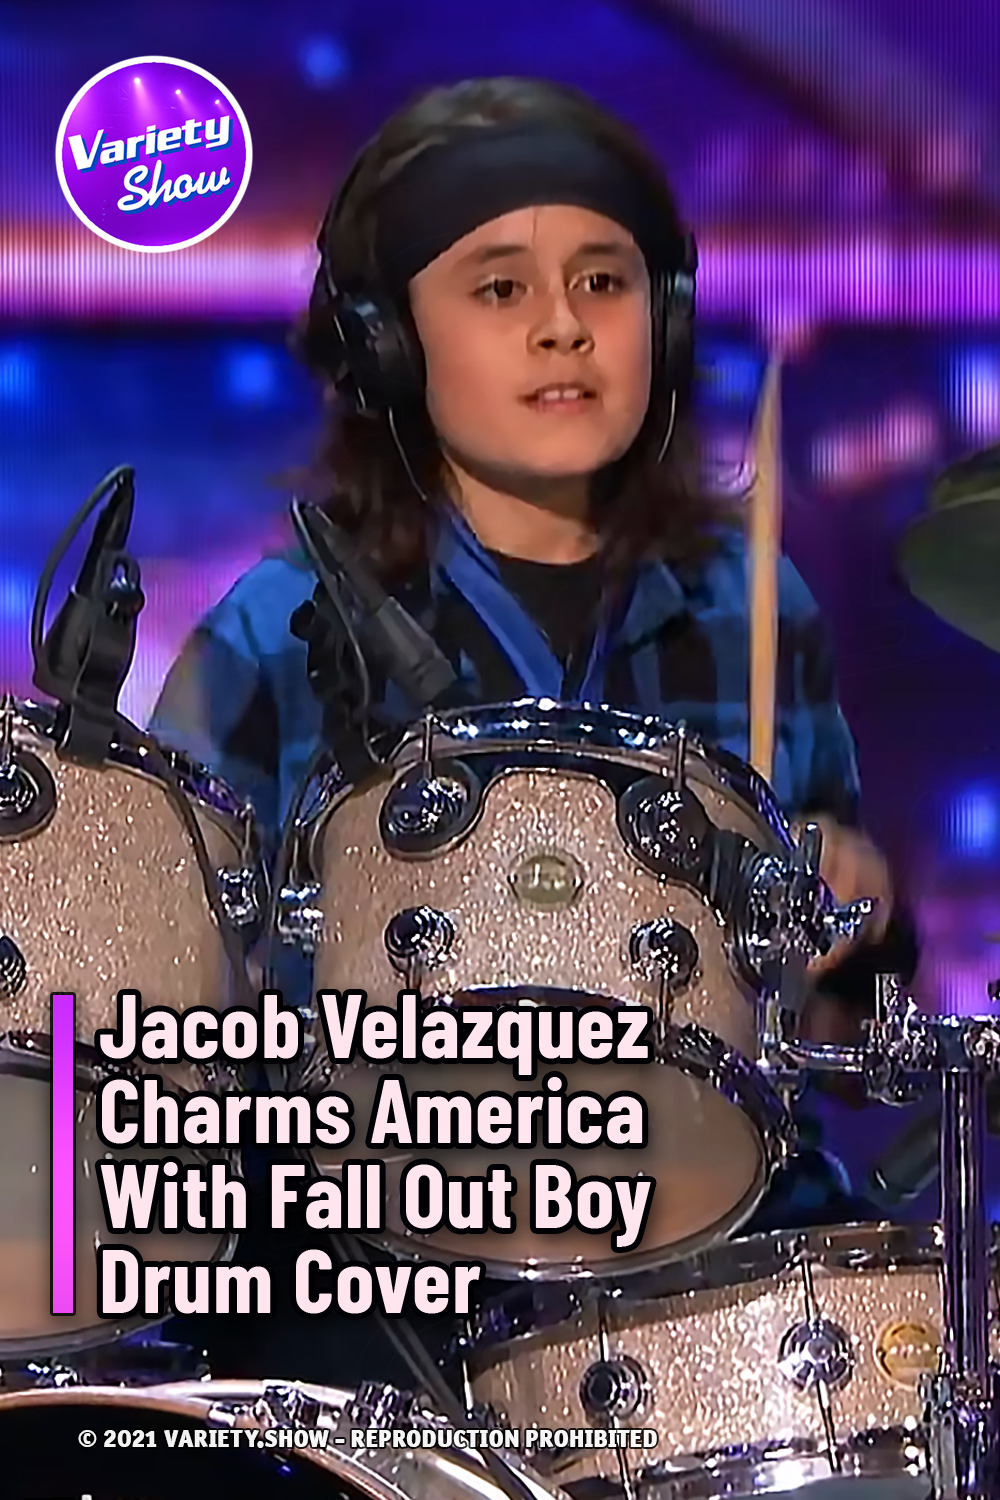 Jacob Velazquez Charms America With Fall Out Boy Drum Cover